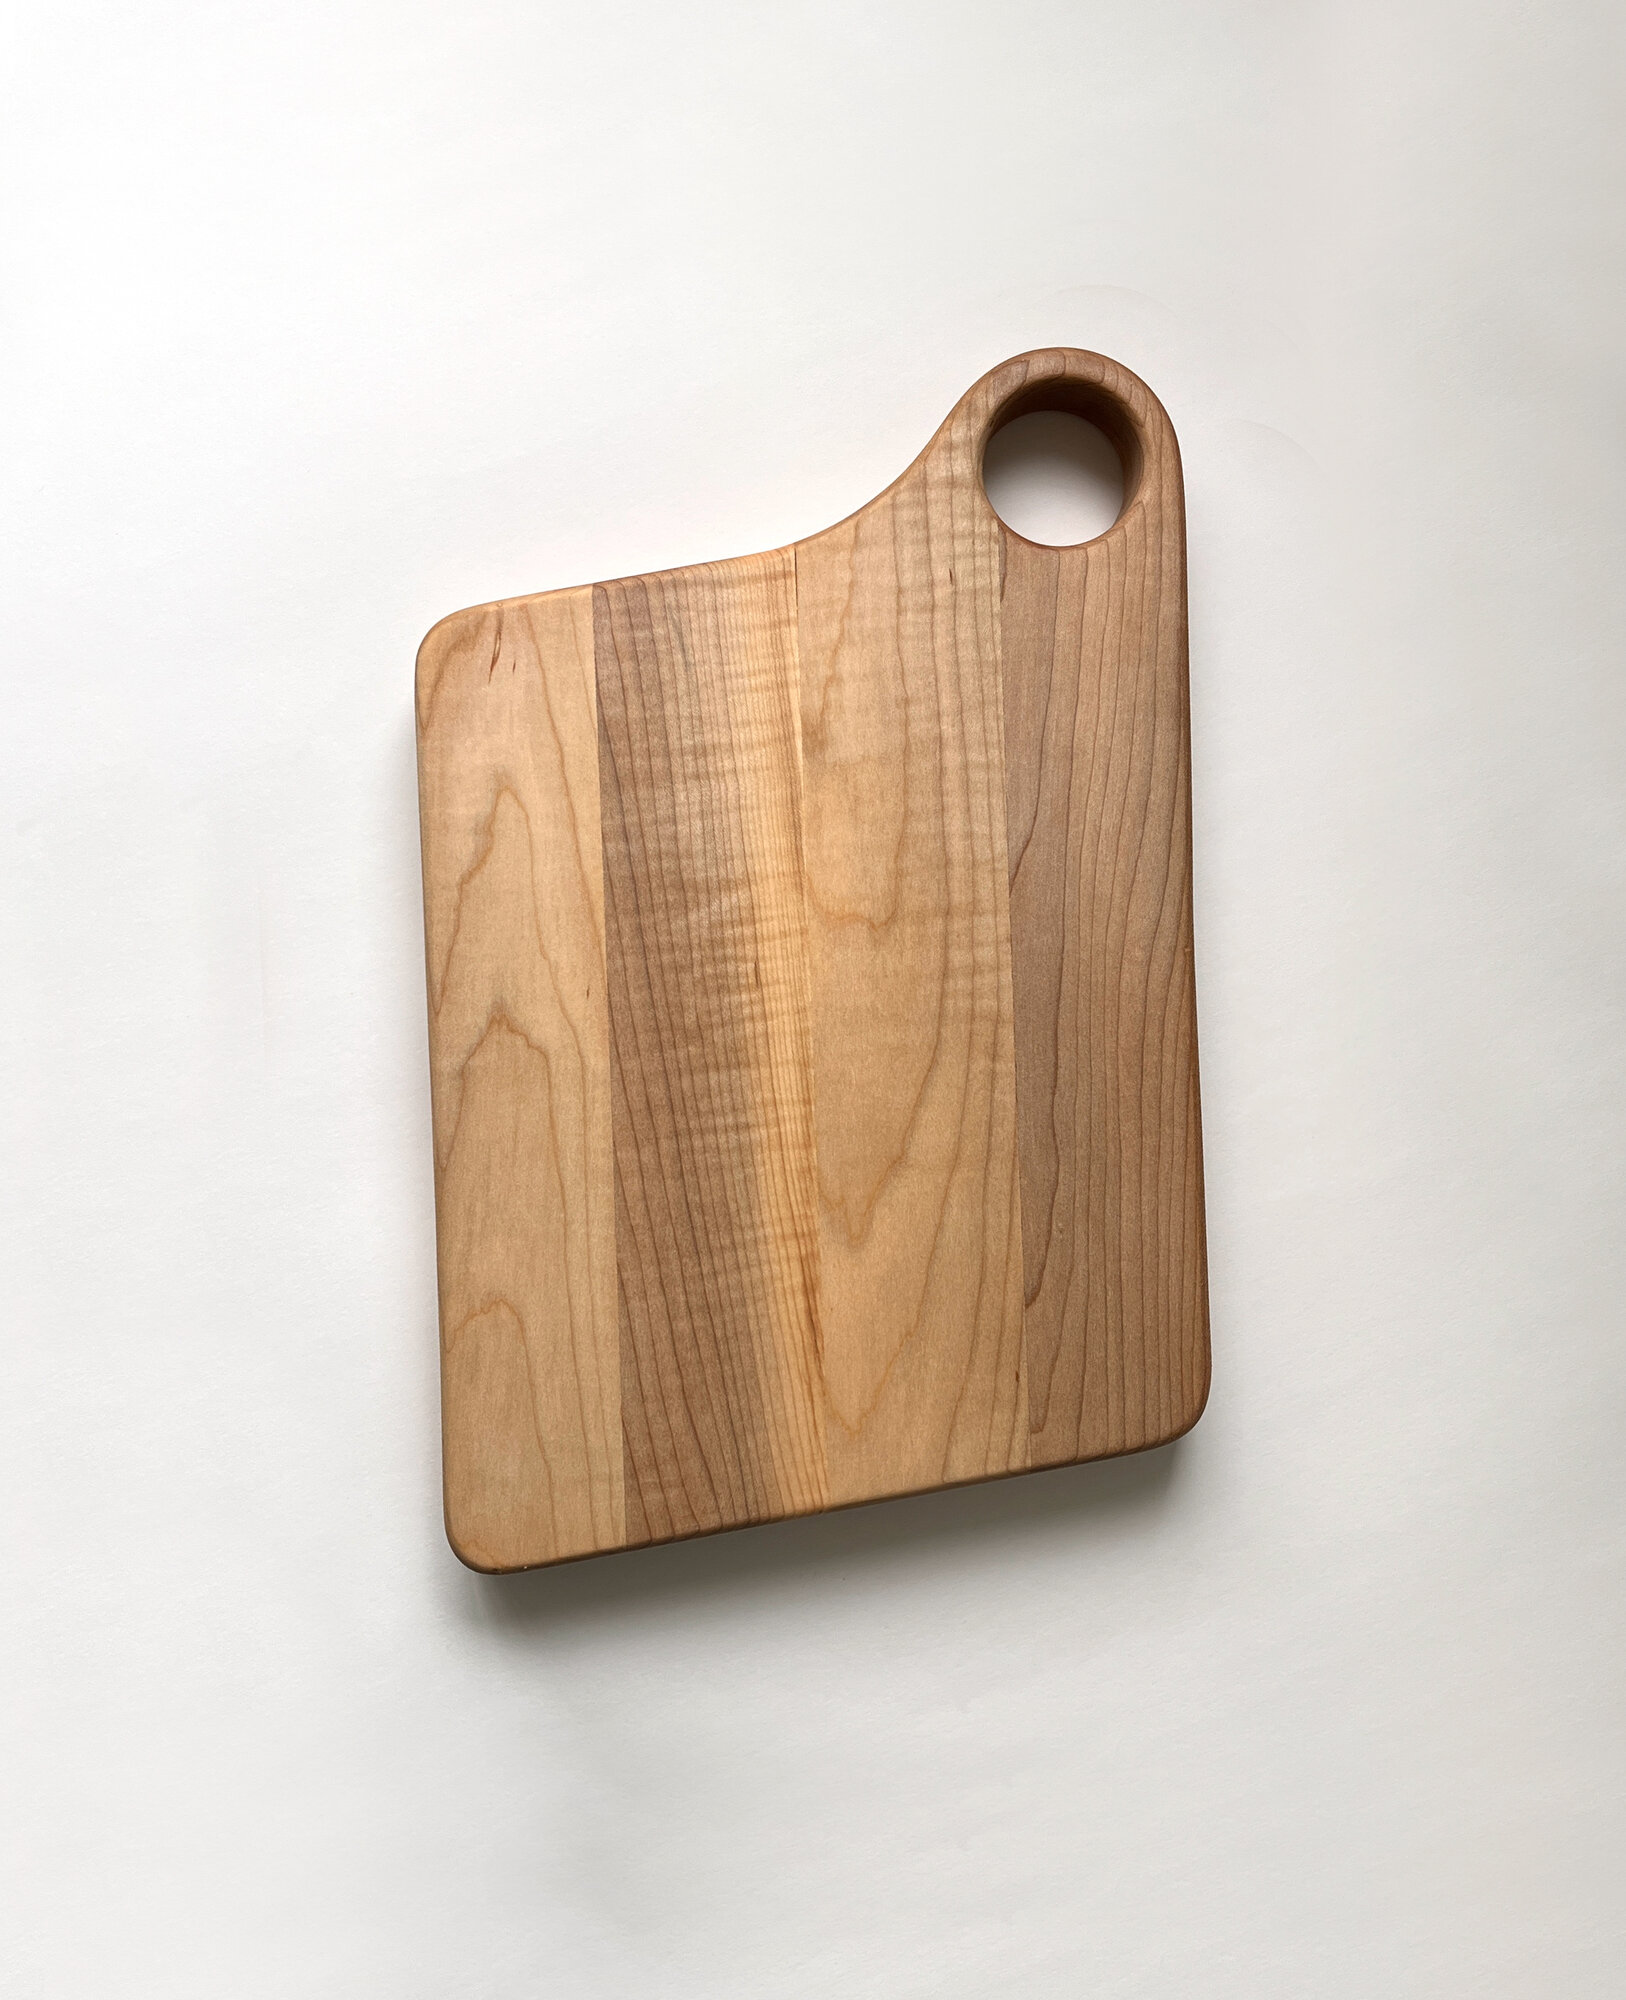 Parallelogram Cutting Board, maple, 2022